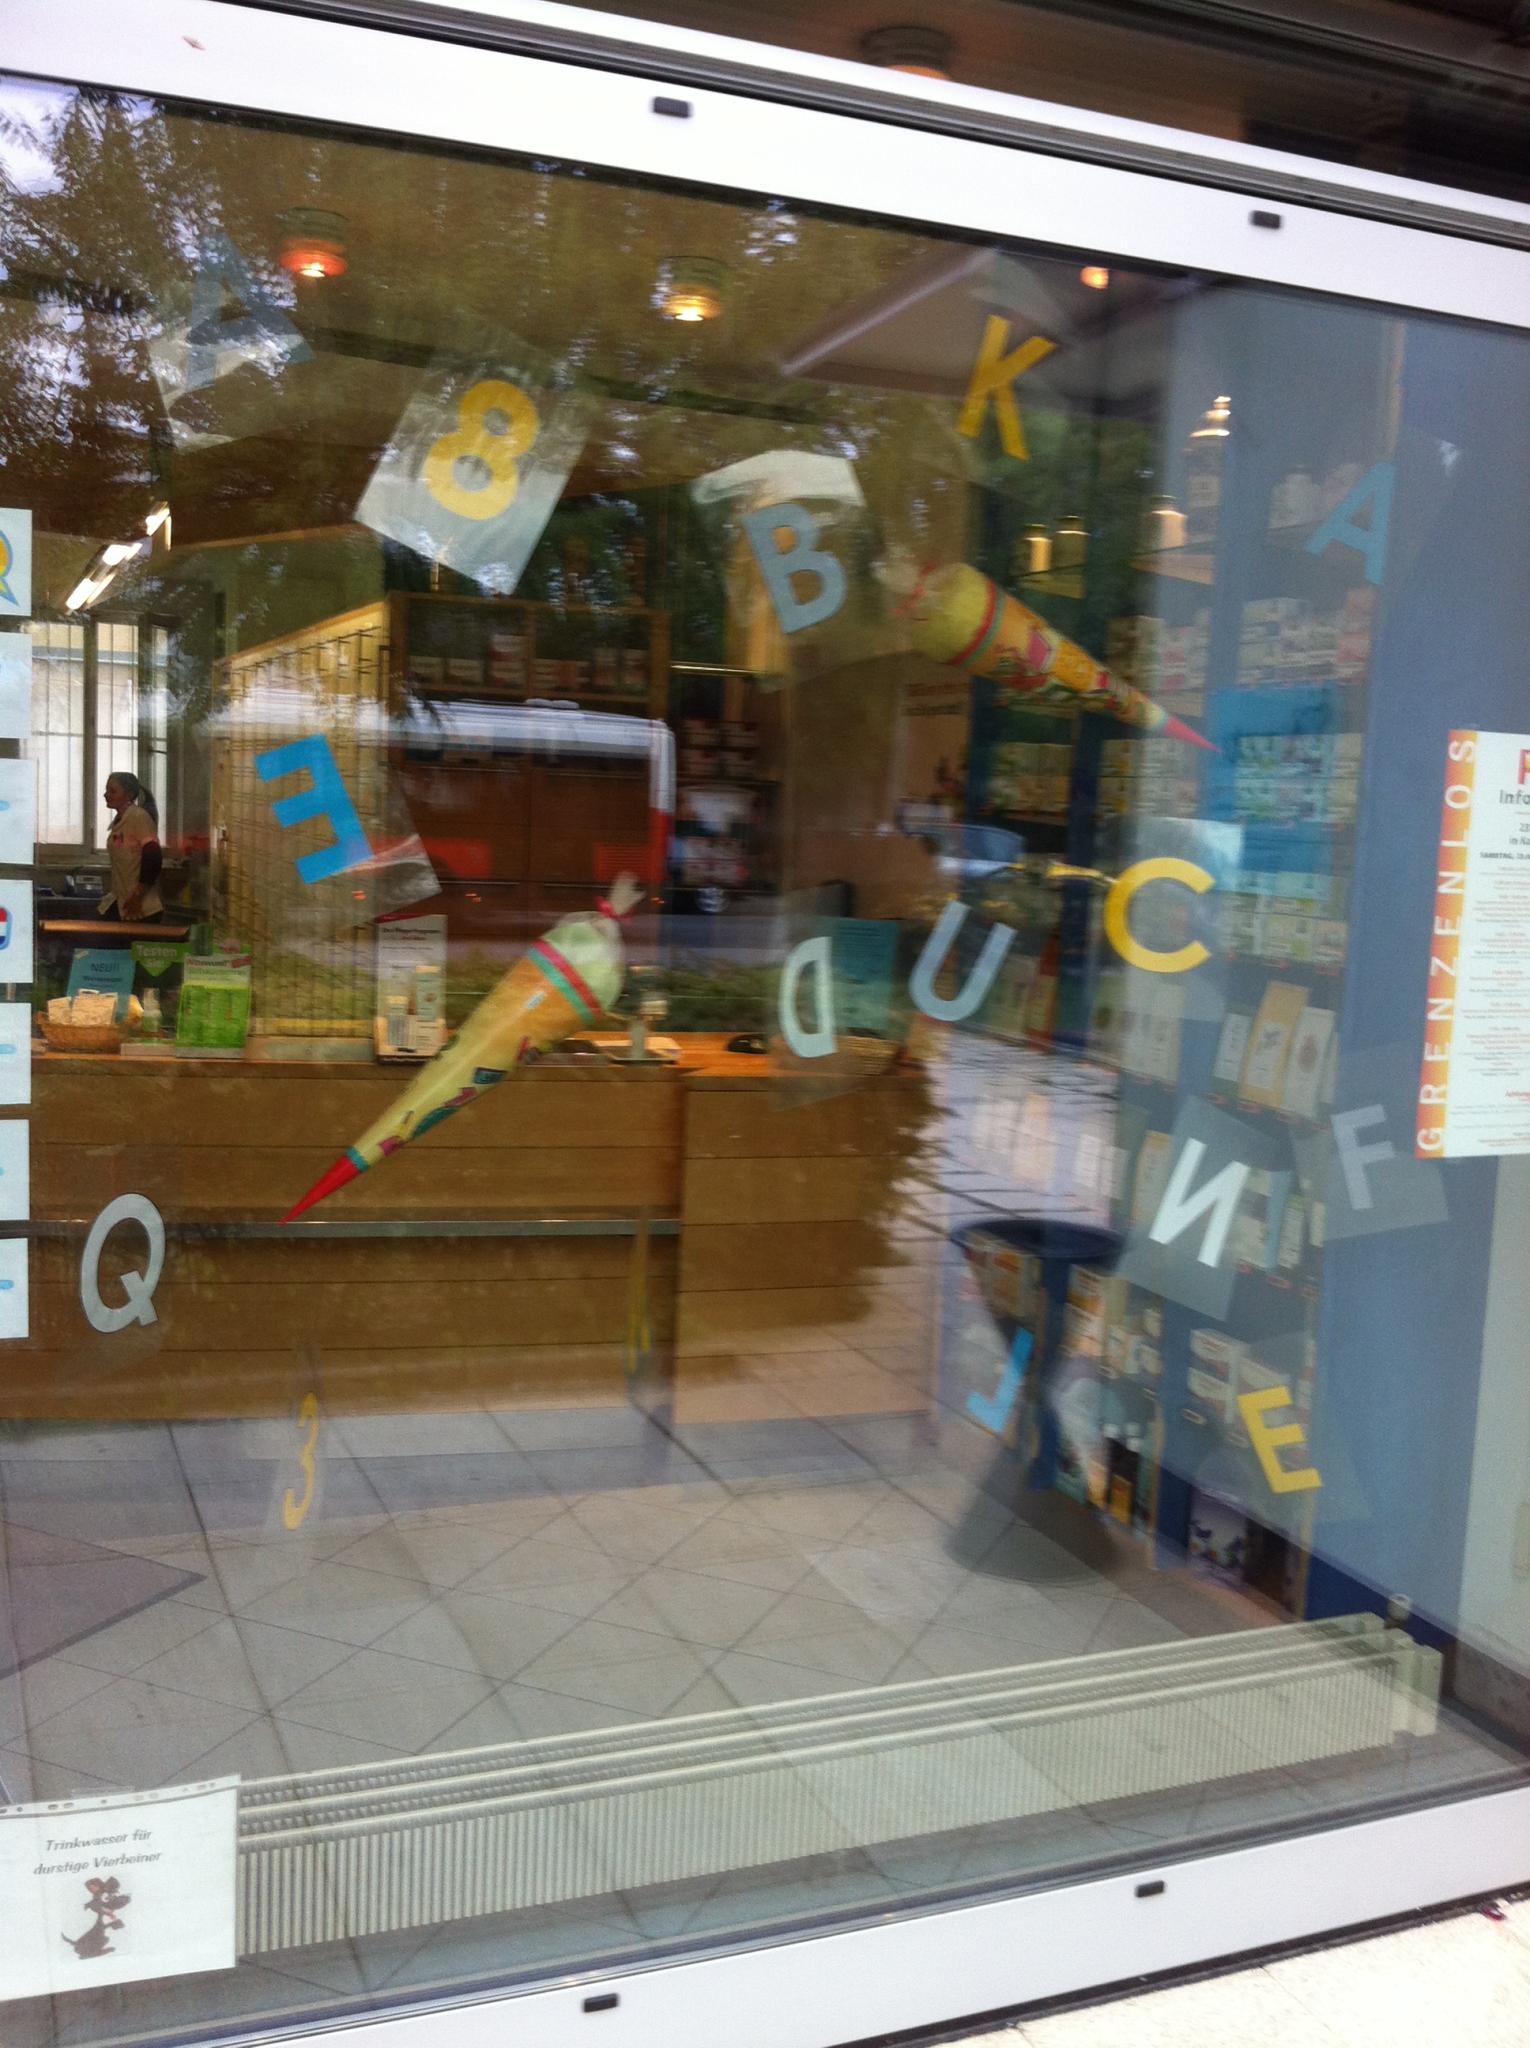 a display window with a display of book titles on it